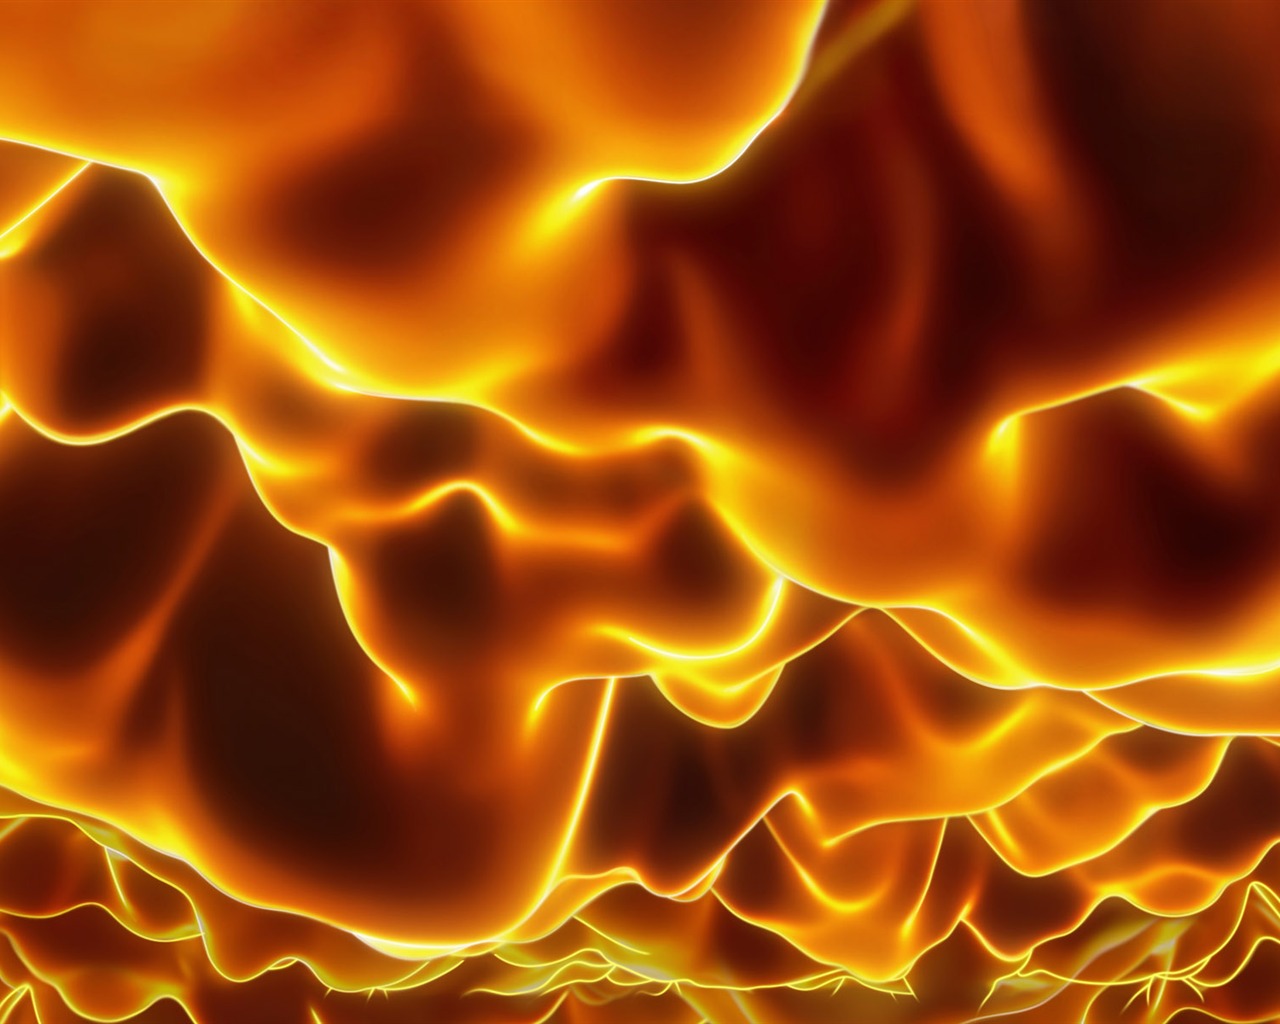 Flame Feature HD Wallpaper #4 - 1280x1024